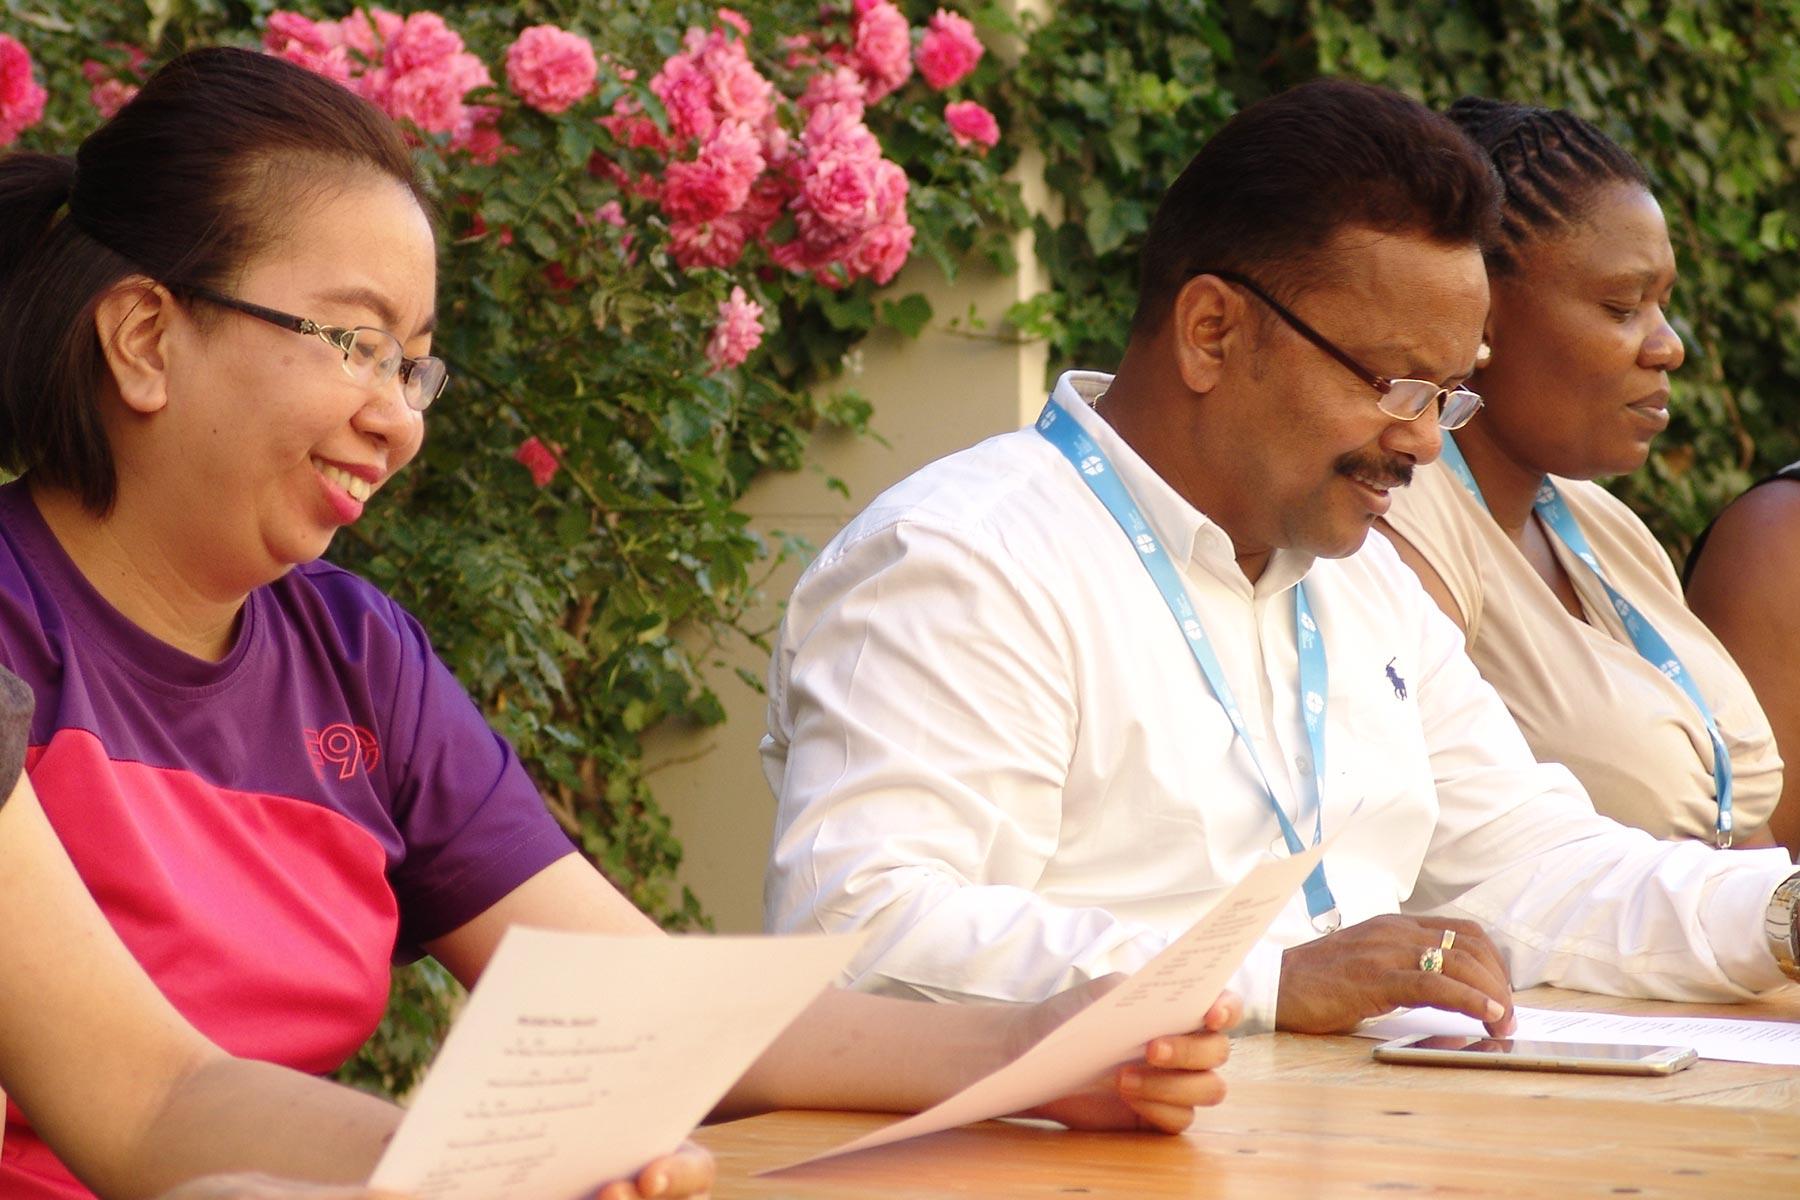 From left: Lay leaders Quelen Angudampai (Malaysia), Manoj Kumar Hial (India) and Mildred Buyiswa Sambane (South Africa) participated in the June 2019 seminar in Wittenberg, Germany. Photo: LWF Center Wittenberg